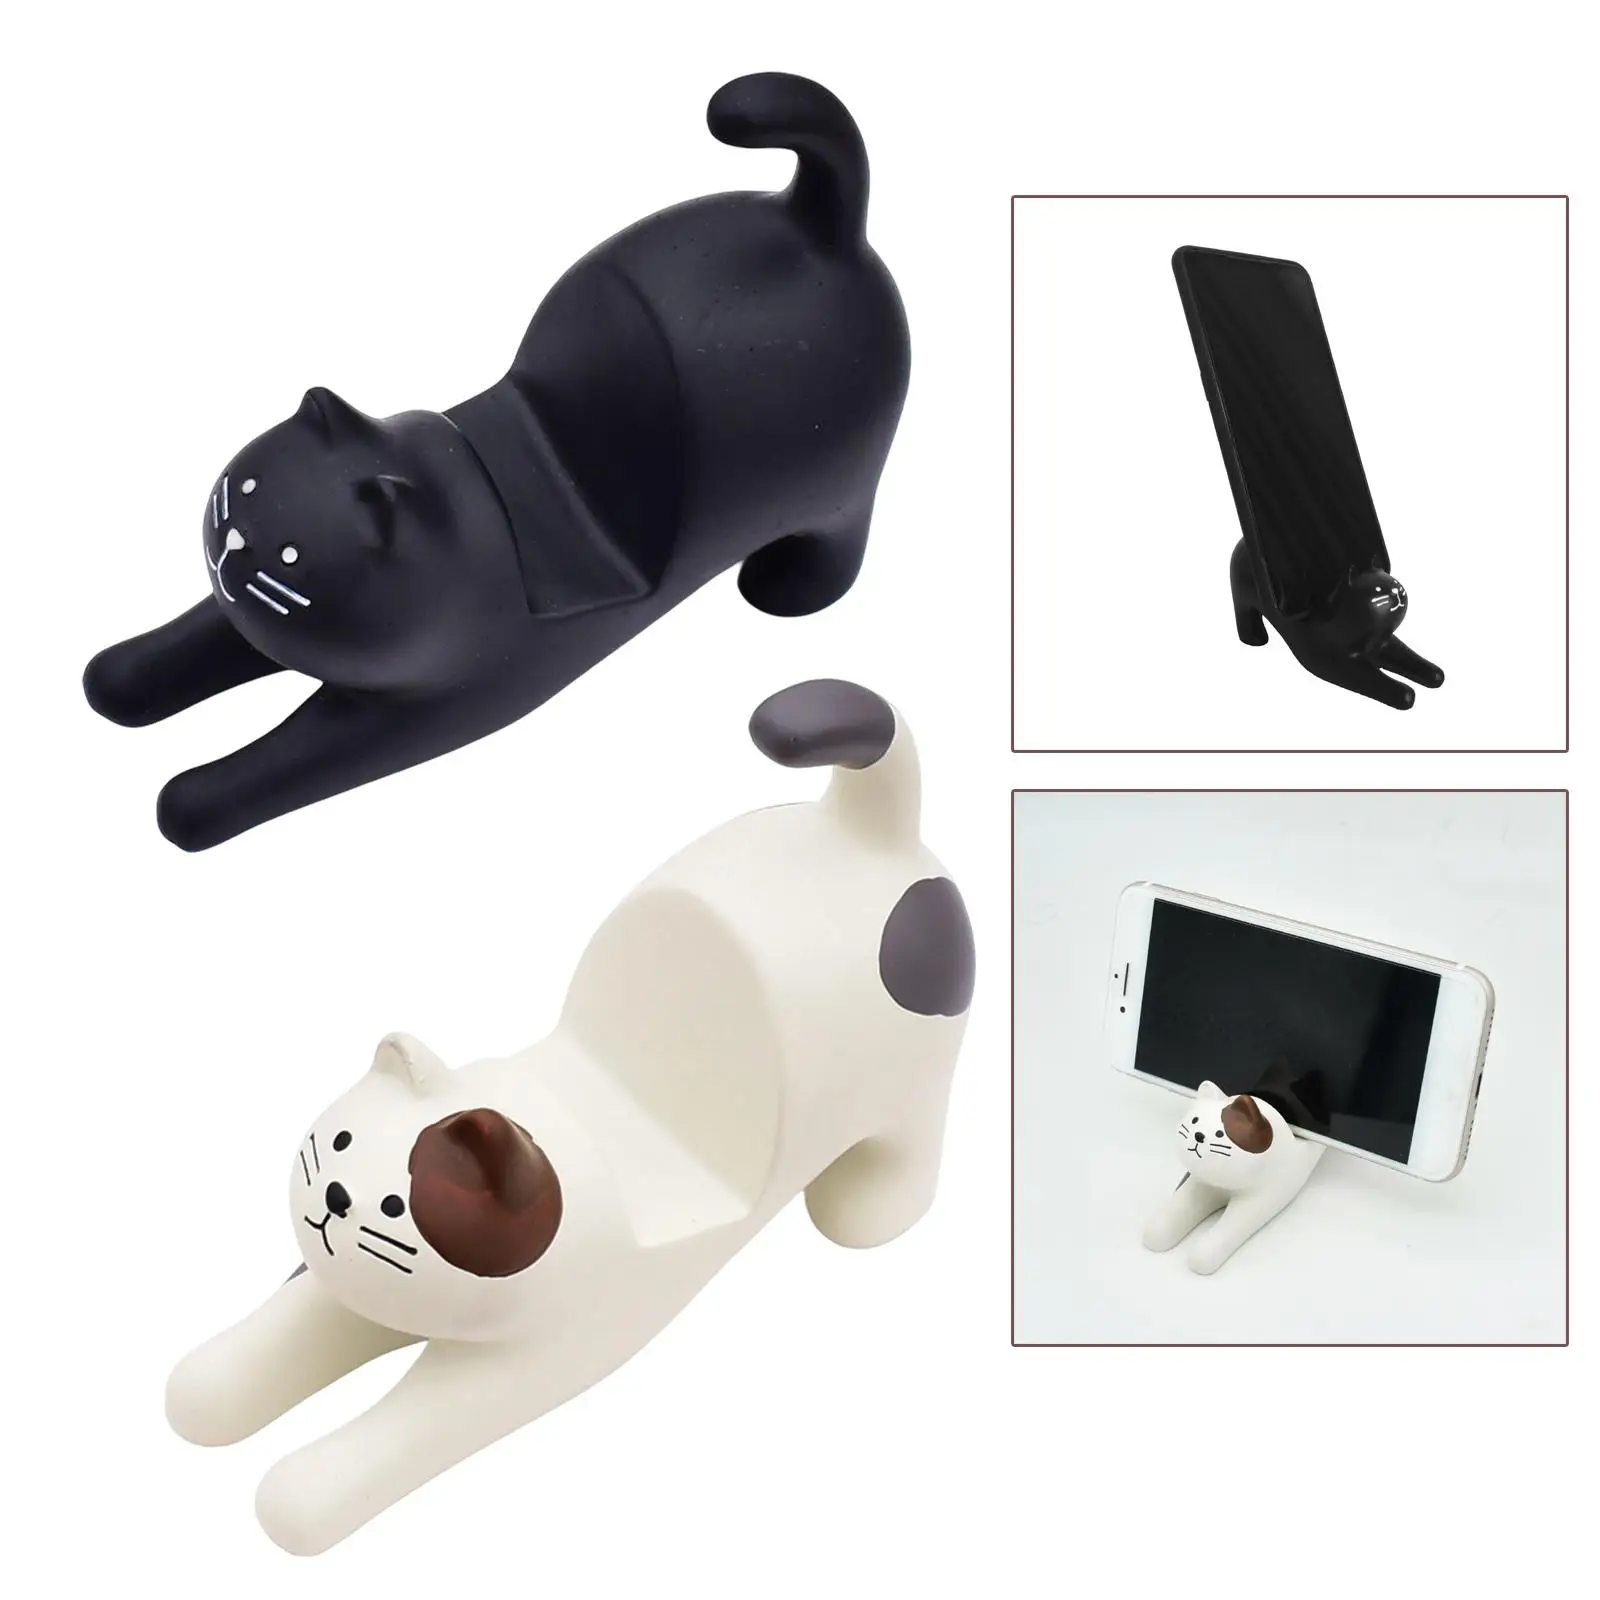 Creative Cat Cell Phone Stand Holder Table Decoration Crafts Tablet Stand for Desk Support Cradle Dock Gifts Animal Kitty